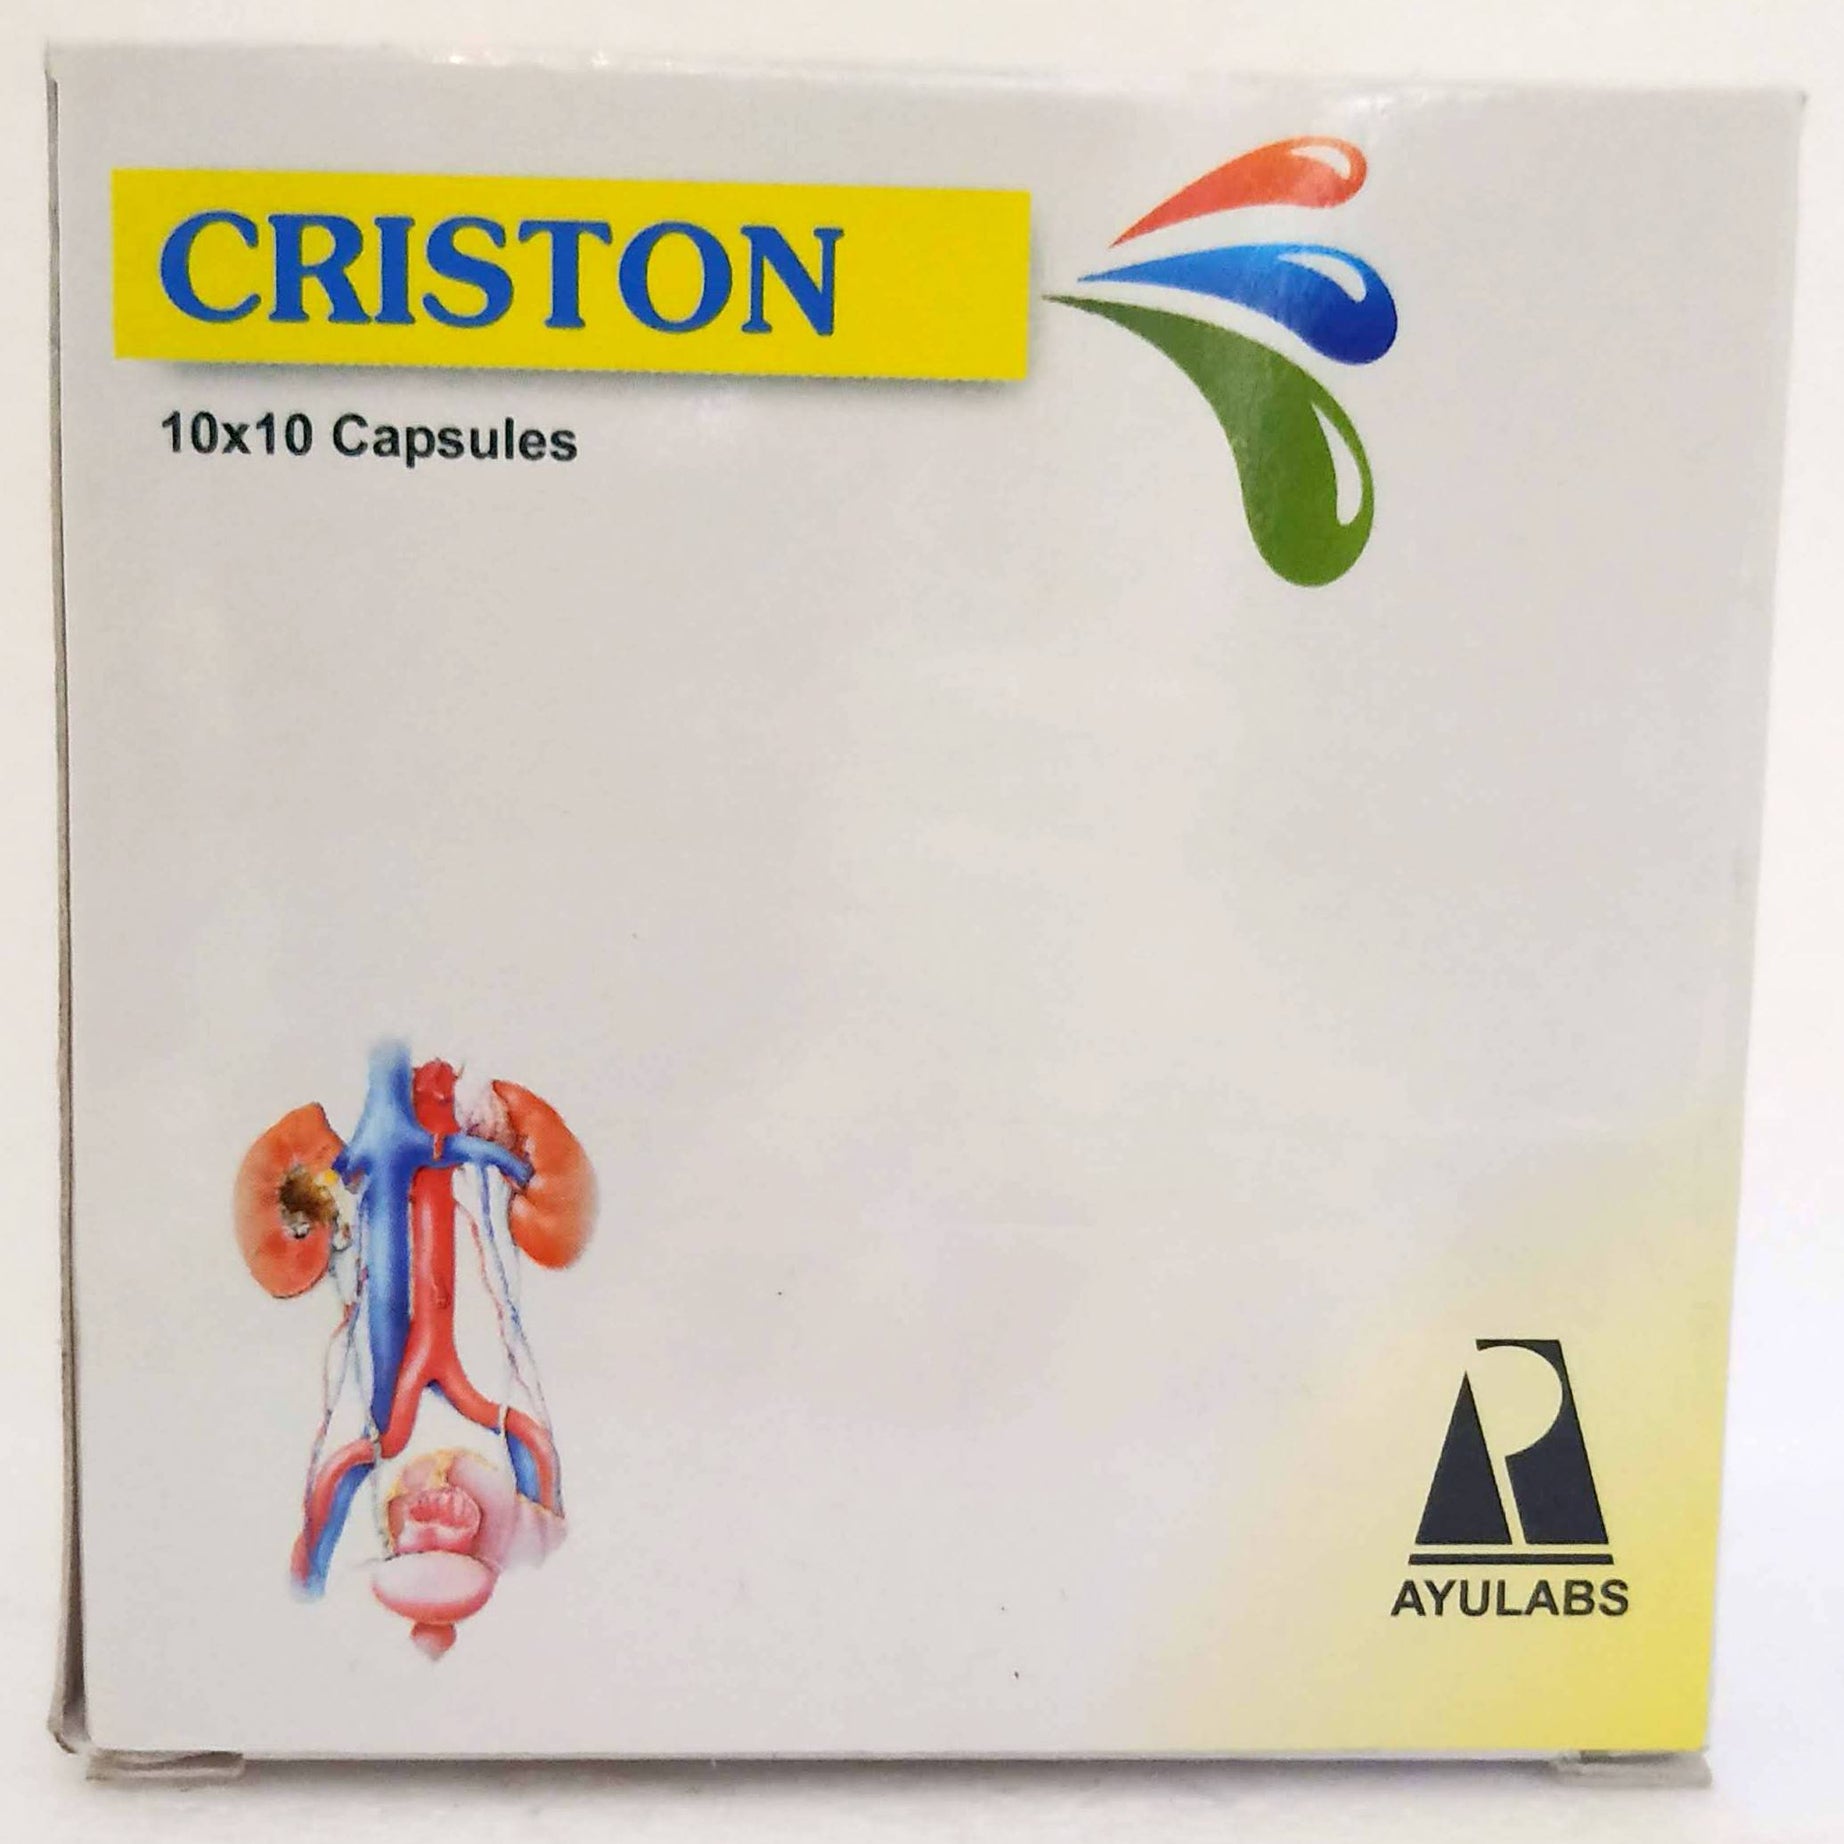 Shop Criston 10Capsules at price 44.00 from Ayulabs Online - Ayush Care